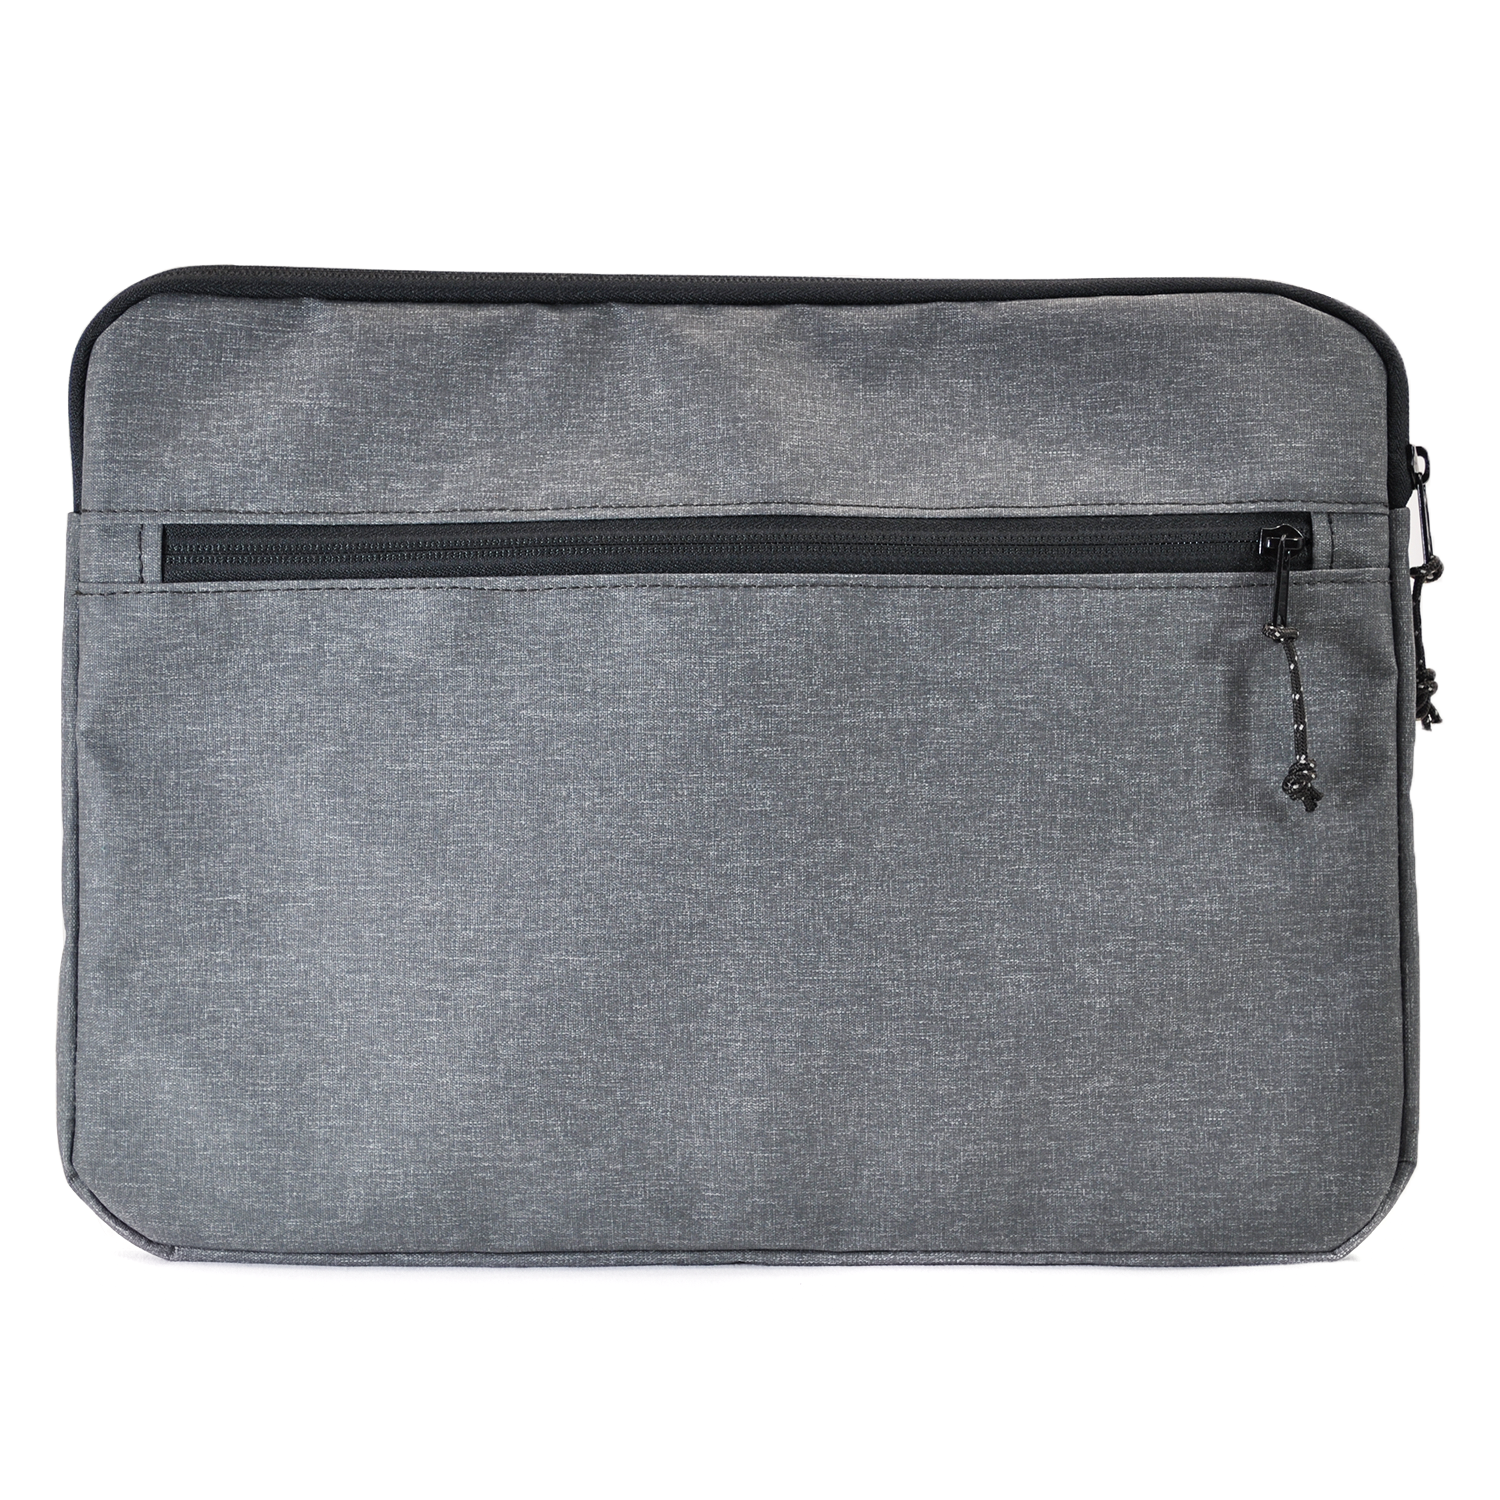 Flowfold Ally Laptop Case &amp; water repellent recycled laptop sleeve made in USA Heather Grey